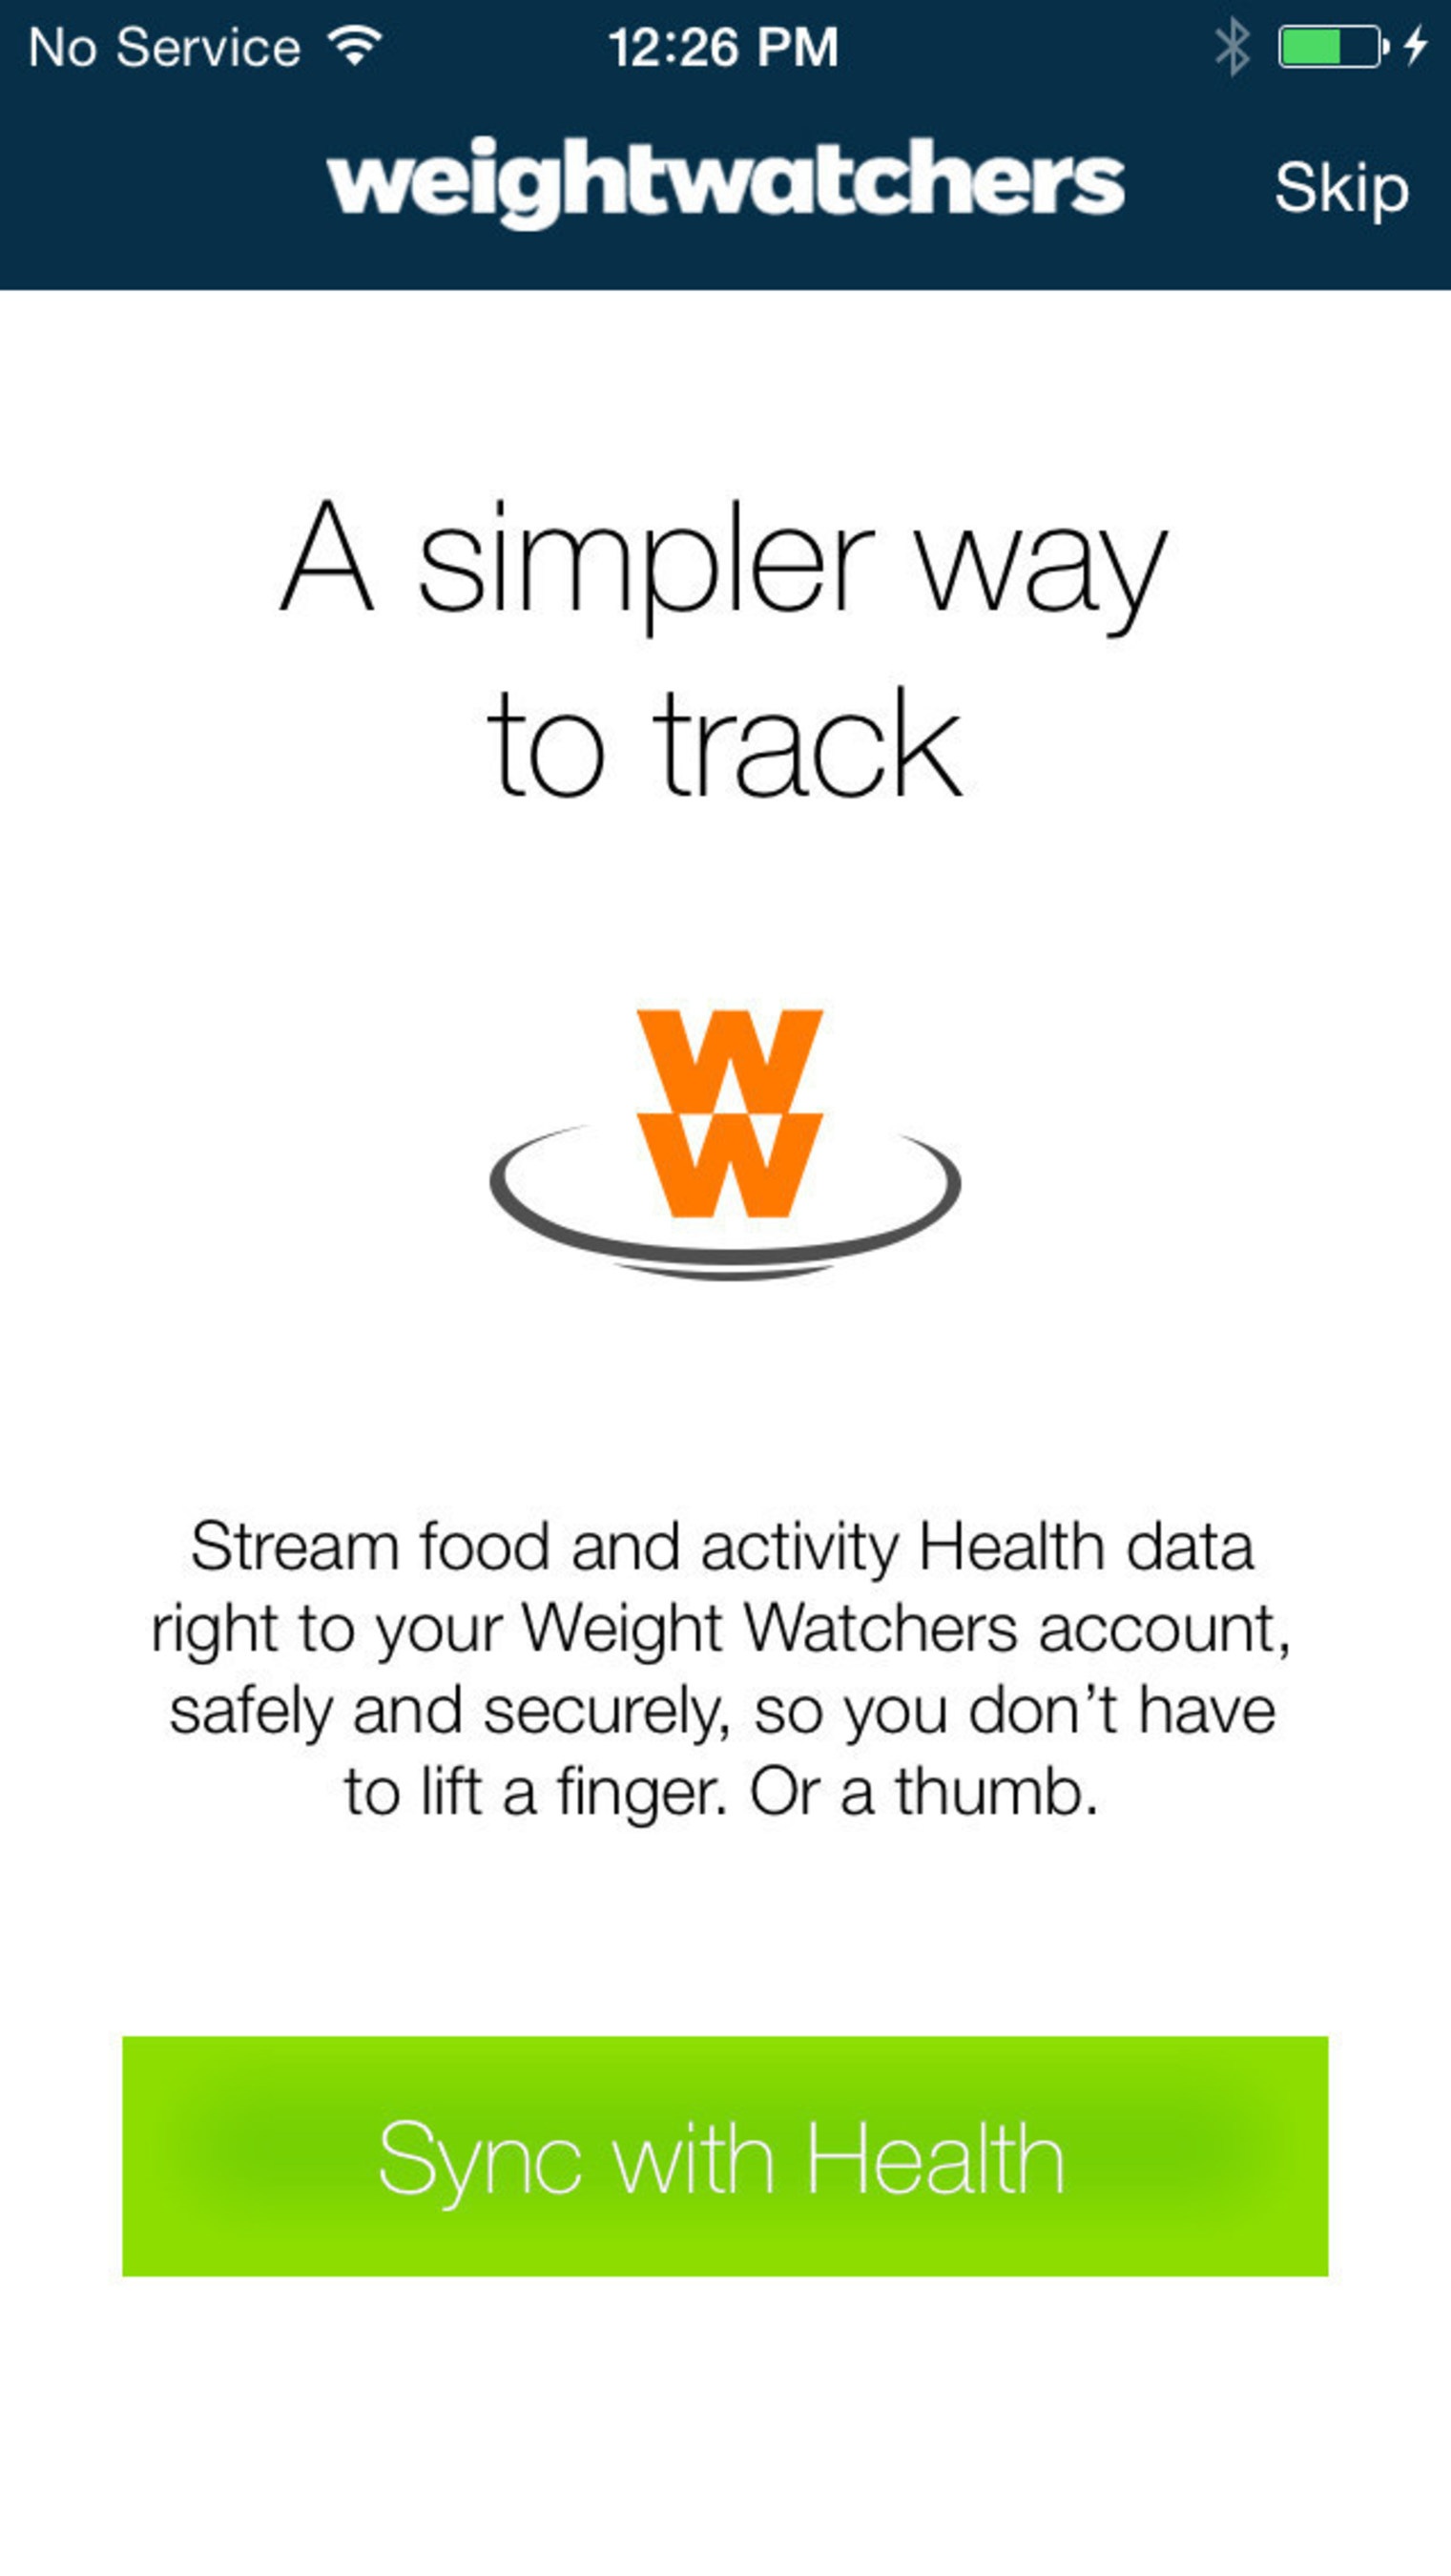 Weight Watchers Leverages iOS 8 And HealthKit With New Features (PRNewsFoto/Weight Watchers International)